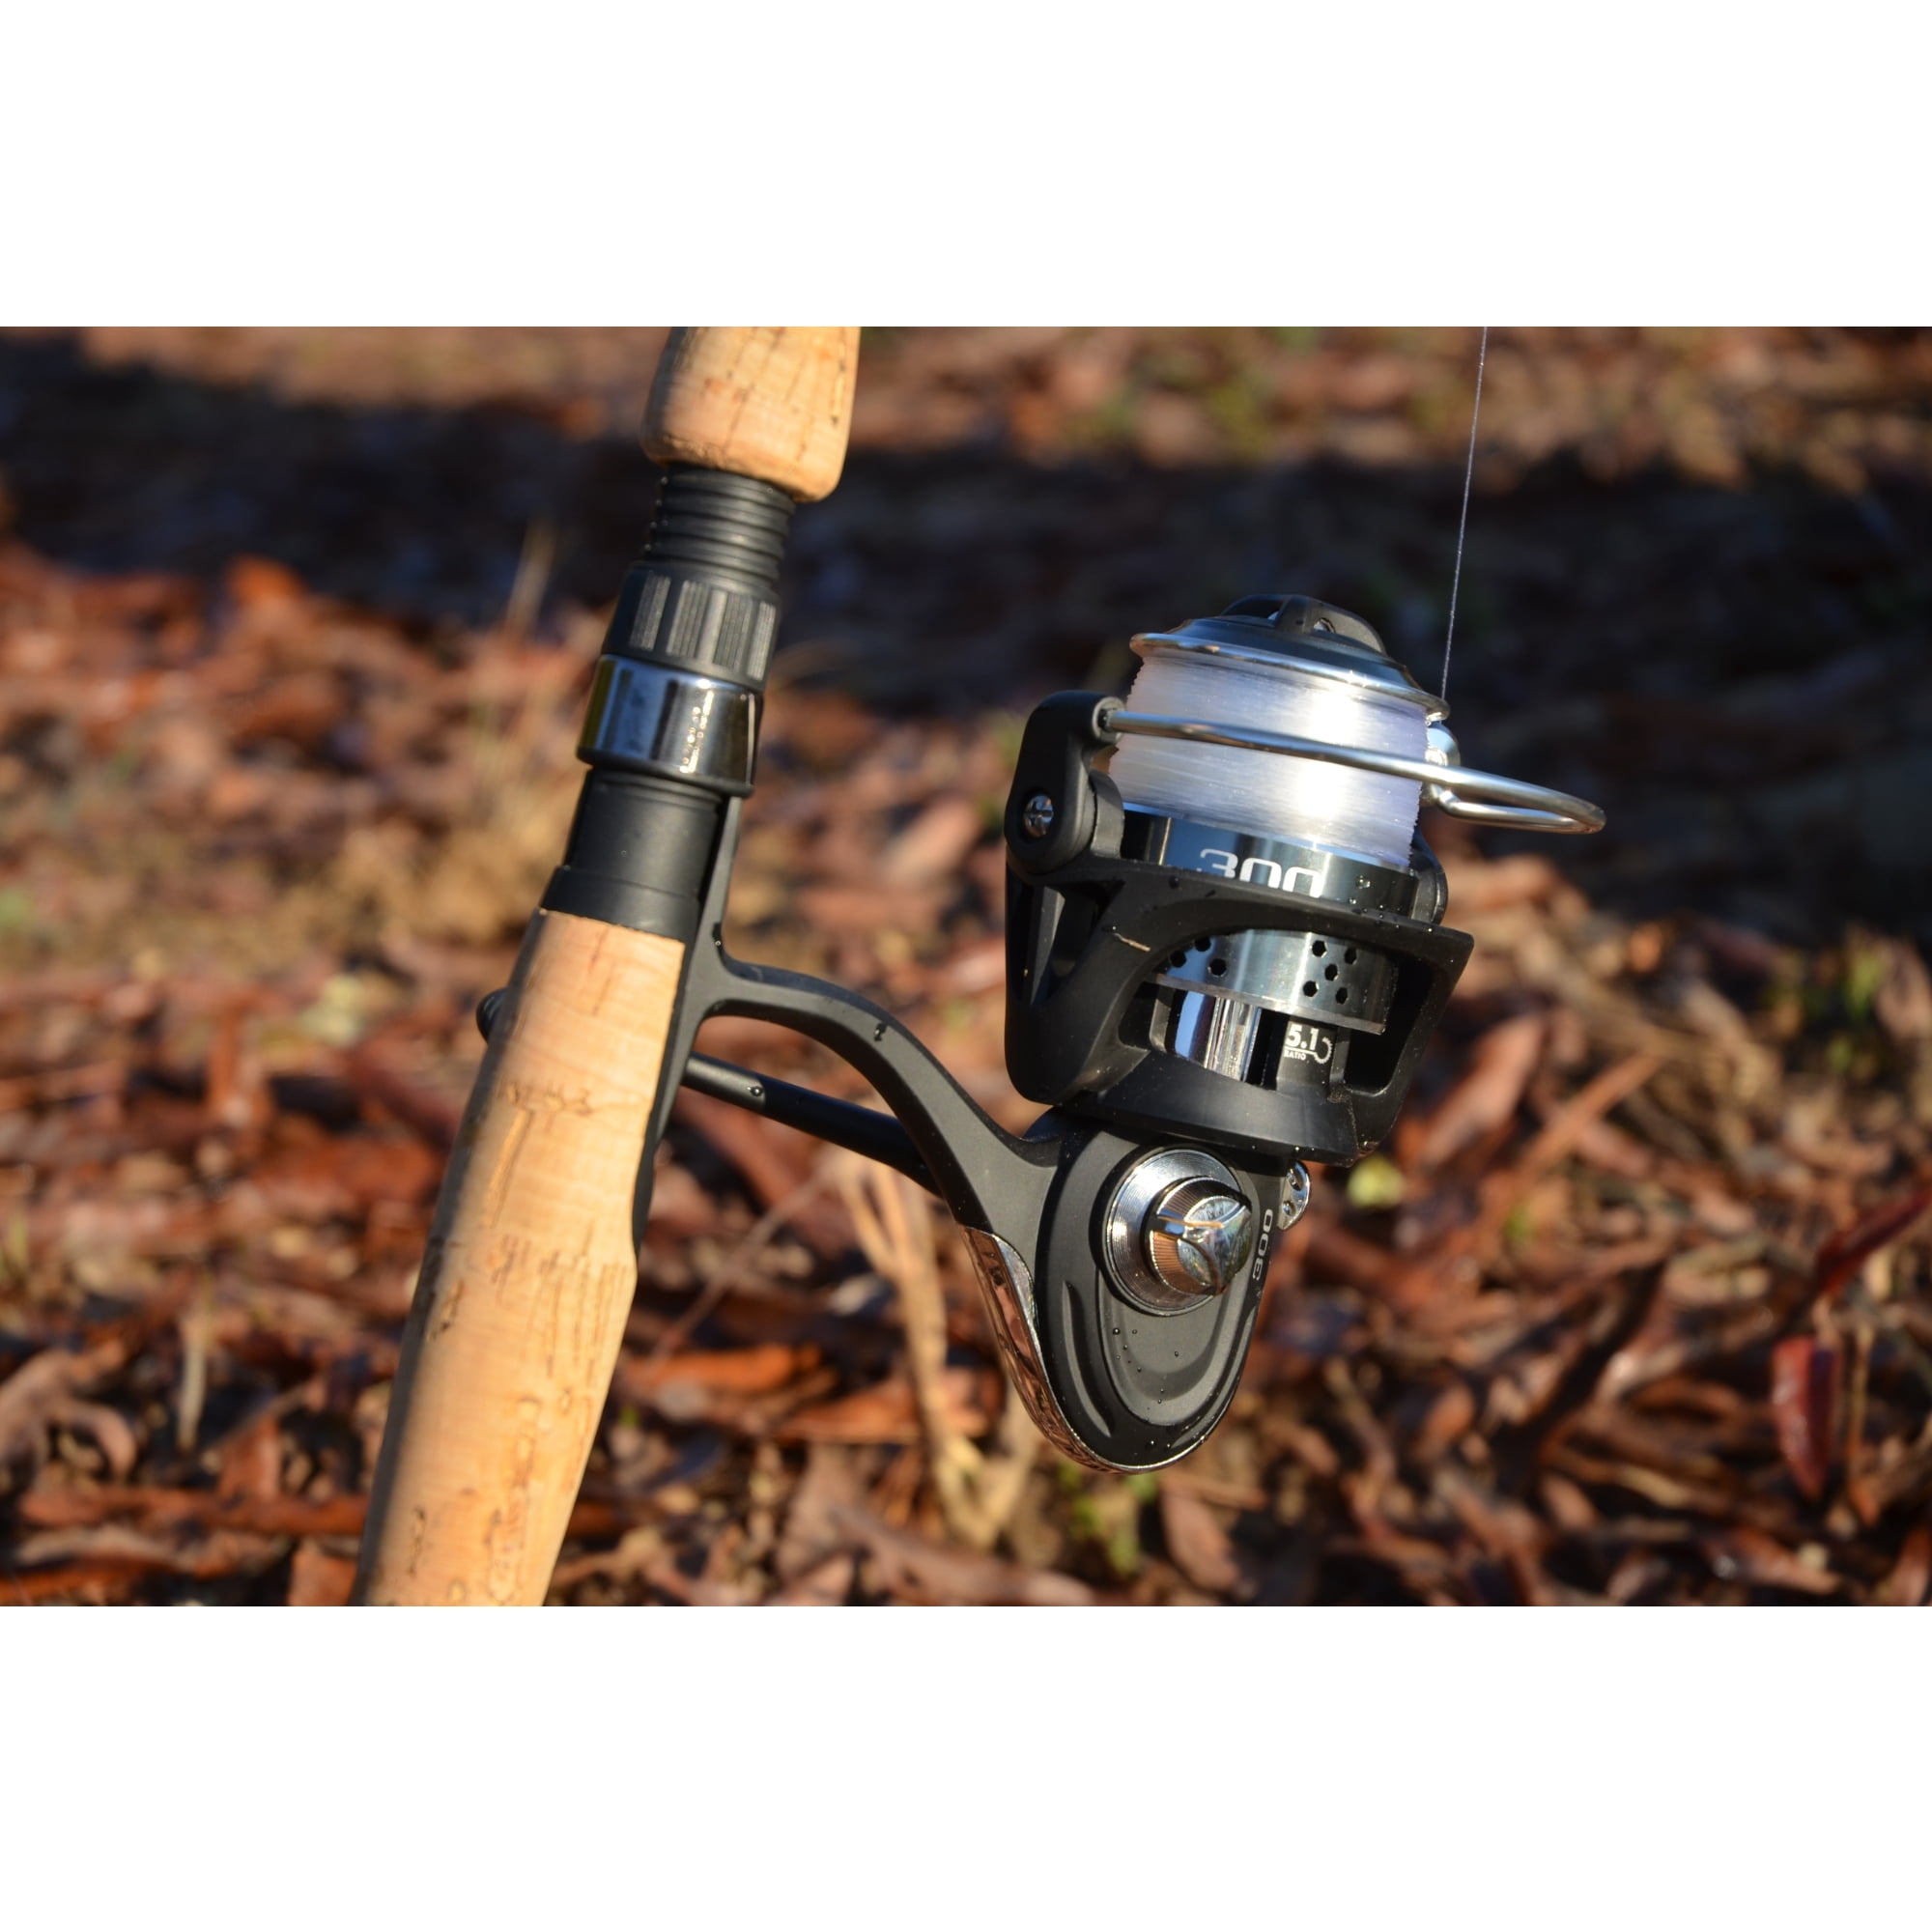 Mitchell 300 and 300 Pro, spinning reels, best reels, terrys travels